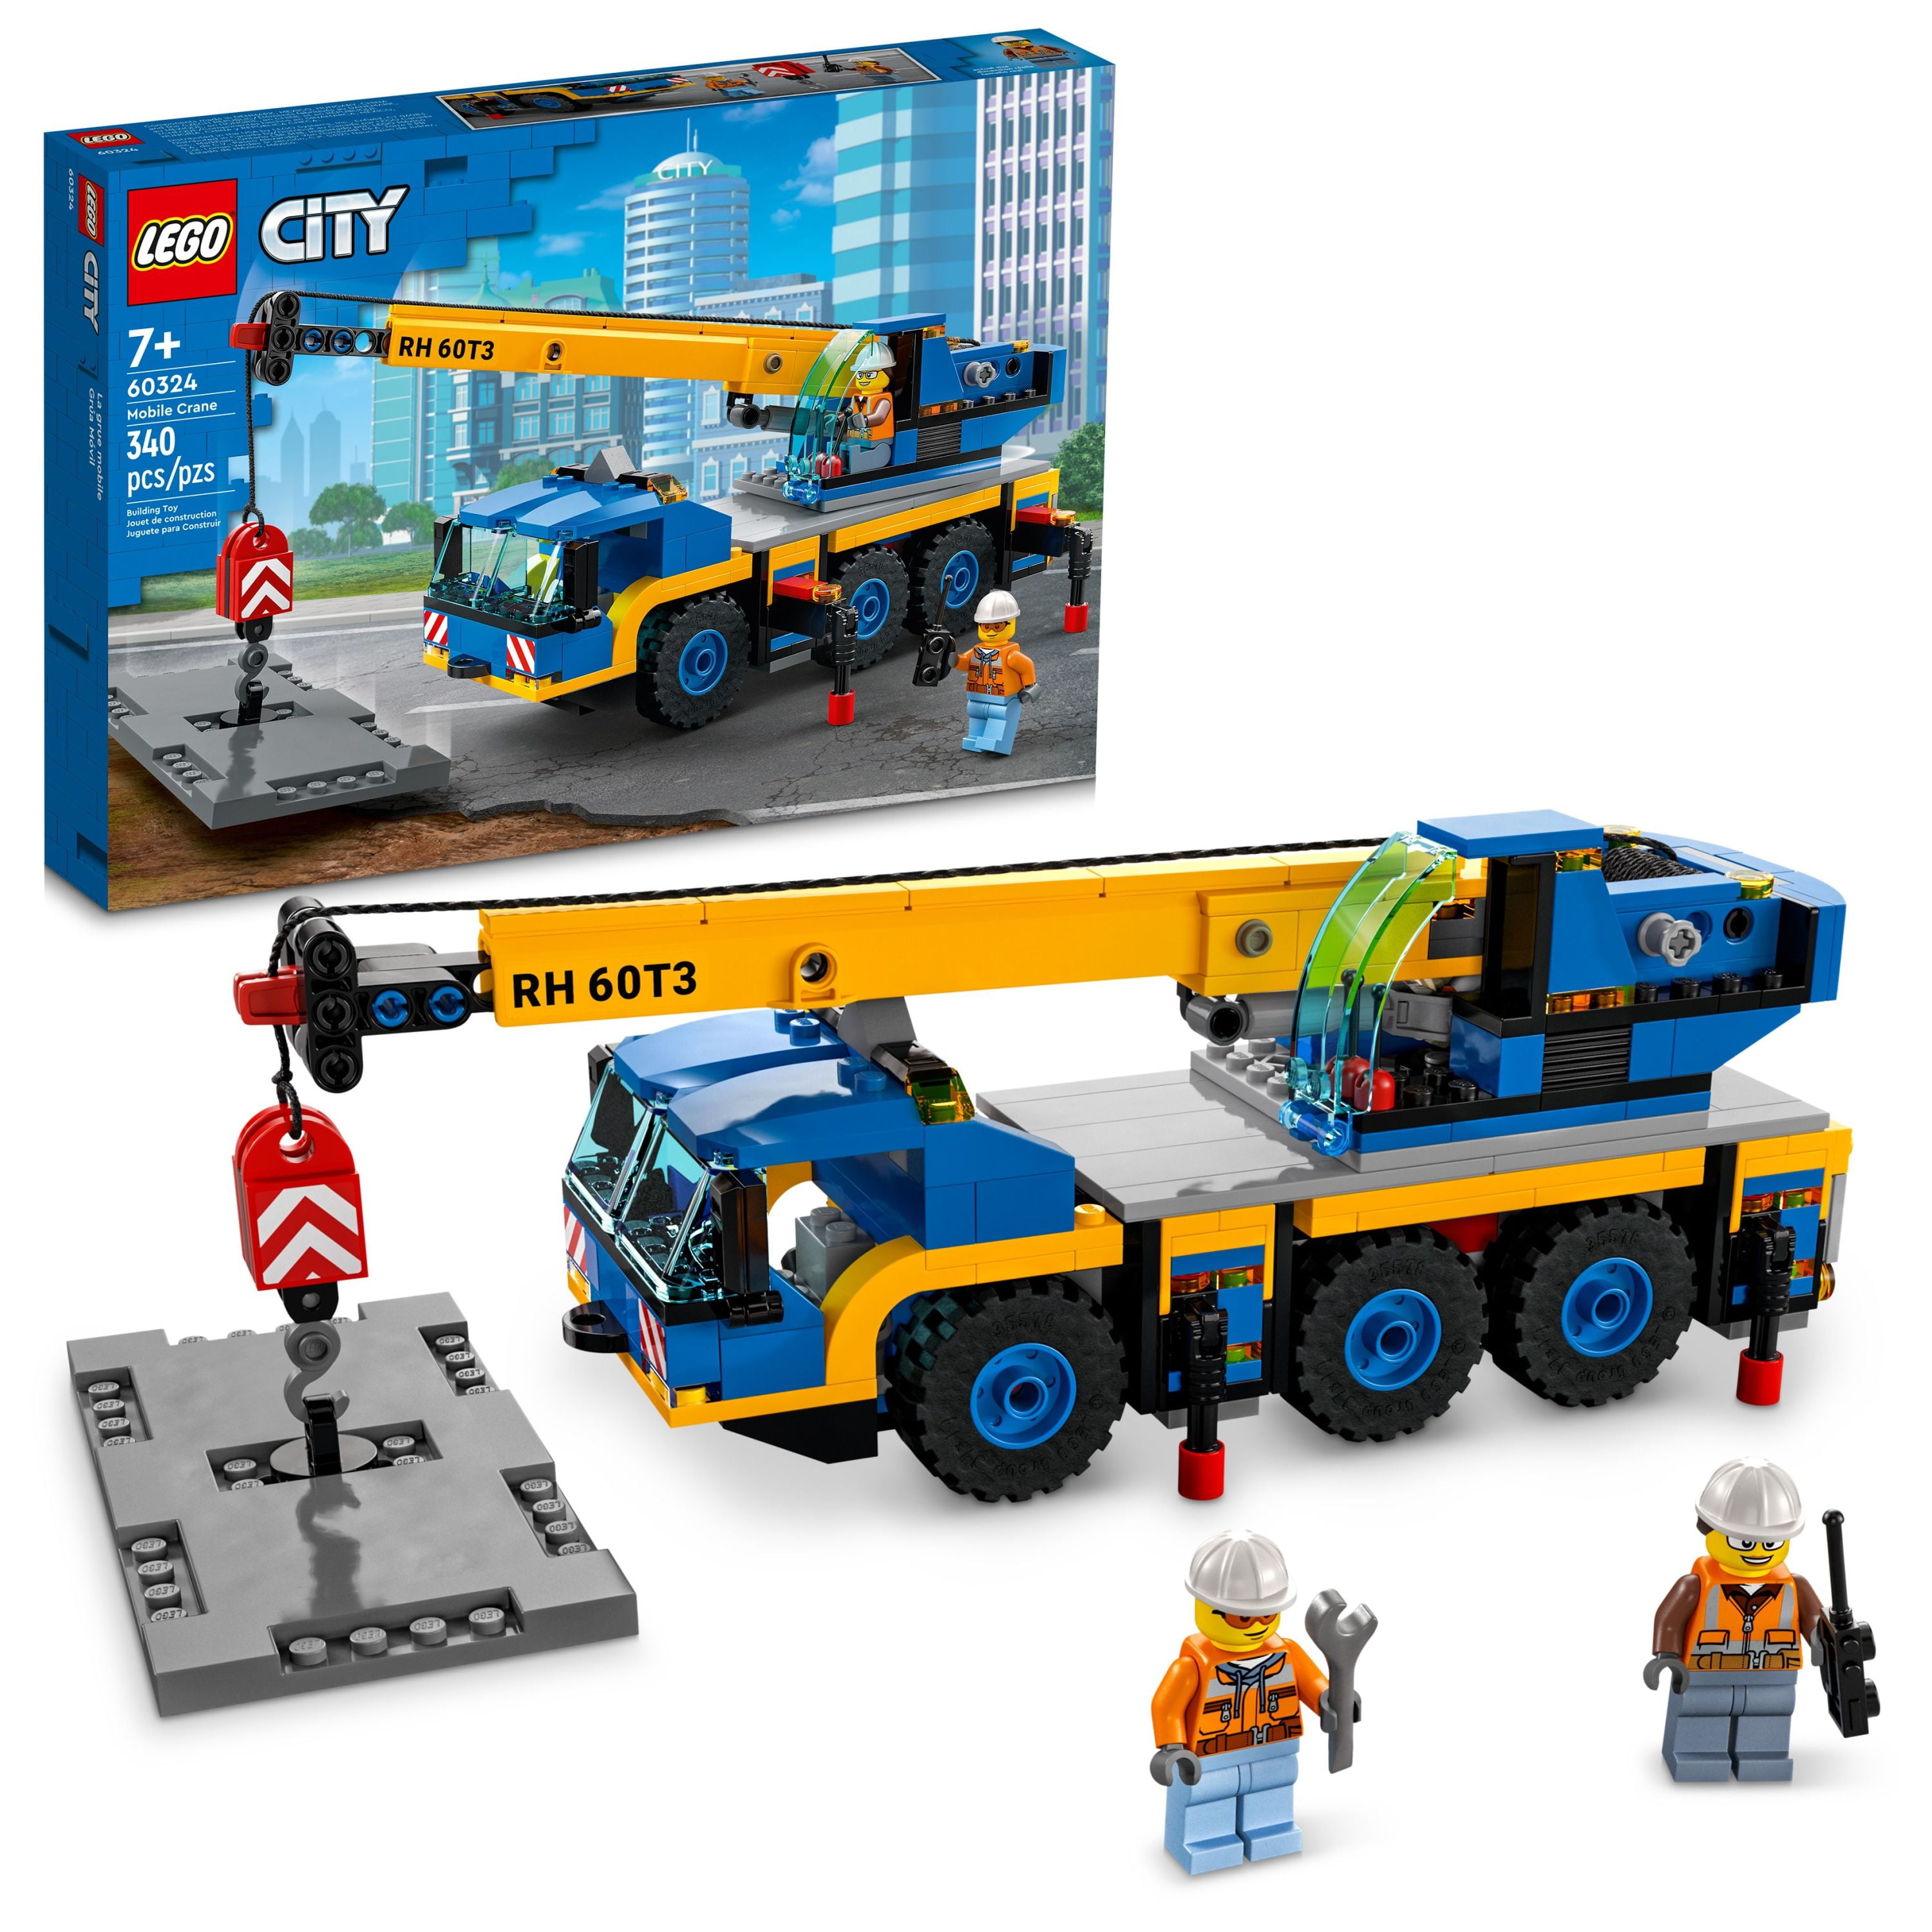 grundigt seng Usikker LEGO City Great Vehicles Mobile Crane Truck Toy Building Set 60324 -  Construction Vehicle Model, Featuring 2 Minifigures with Tool Toys Kit and  Road Plate, Playset for Boys and Girls Ages 7+ - Walmart.com